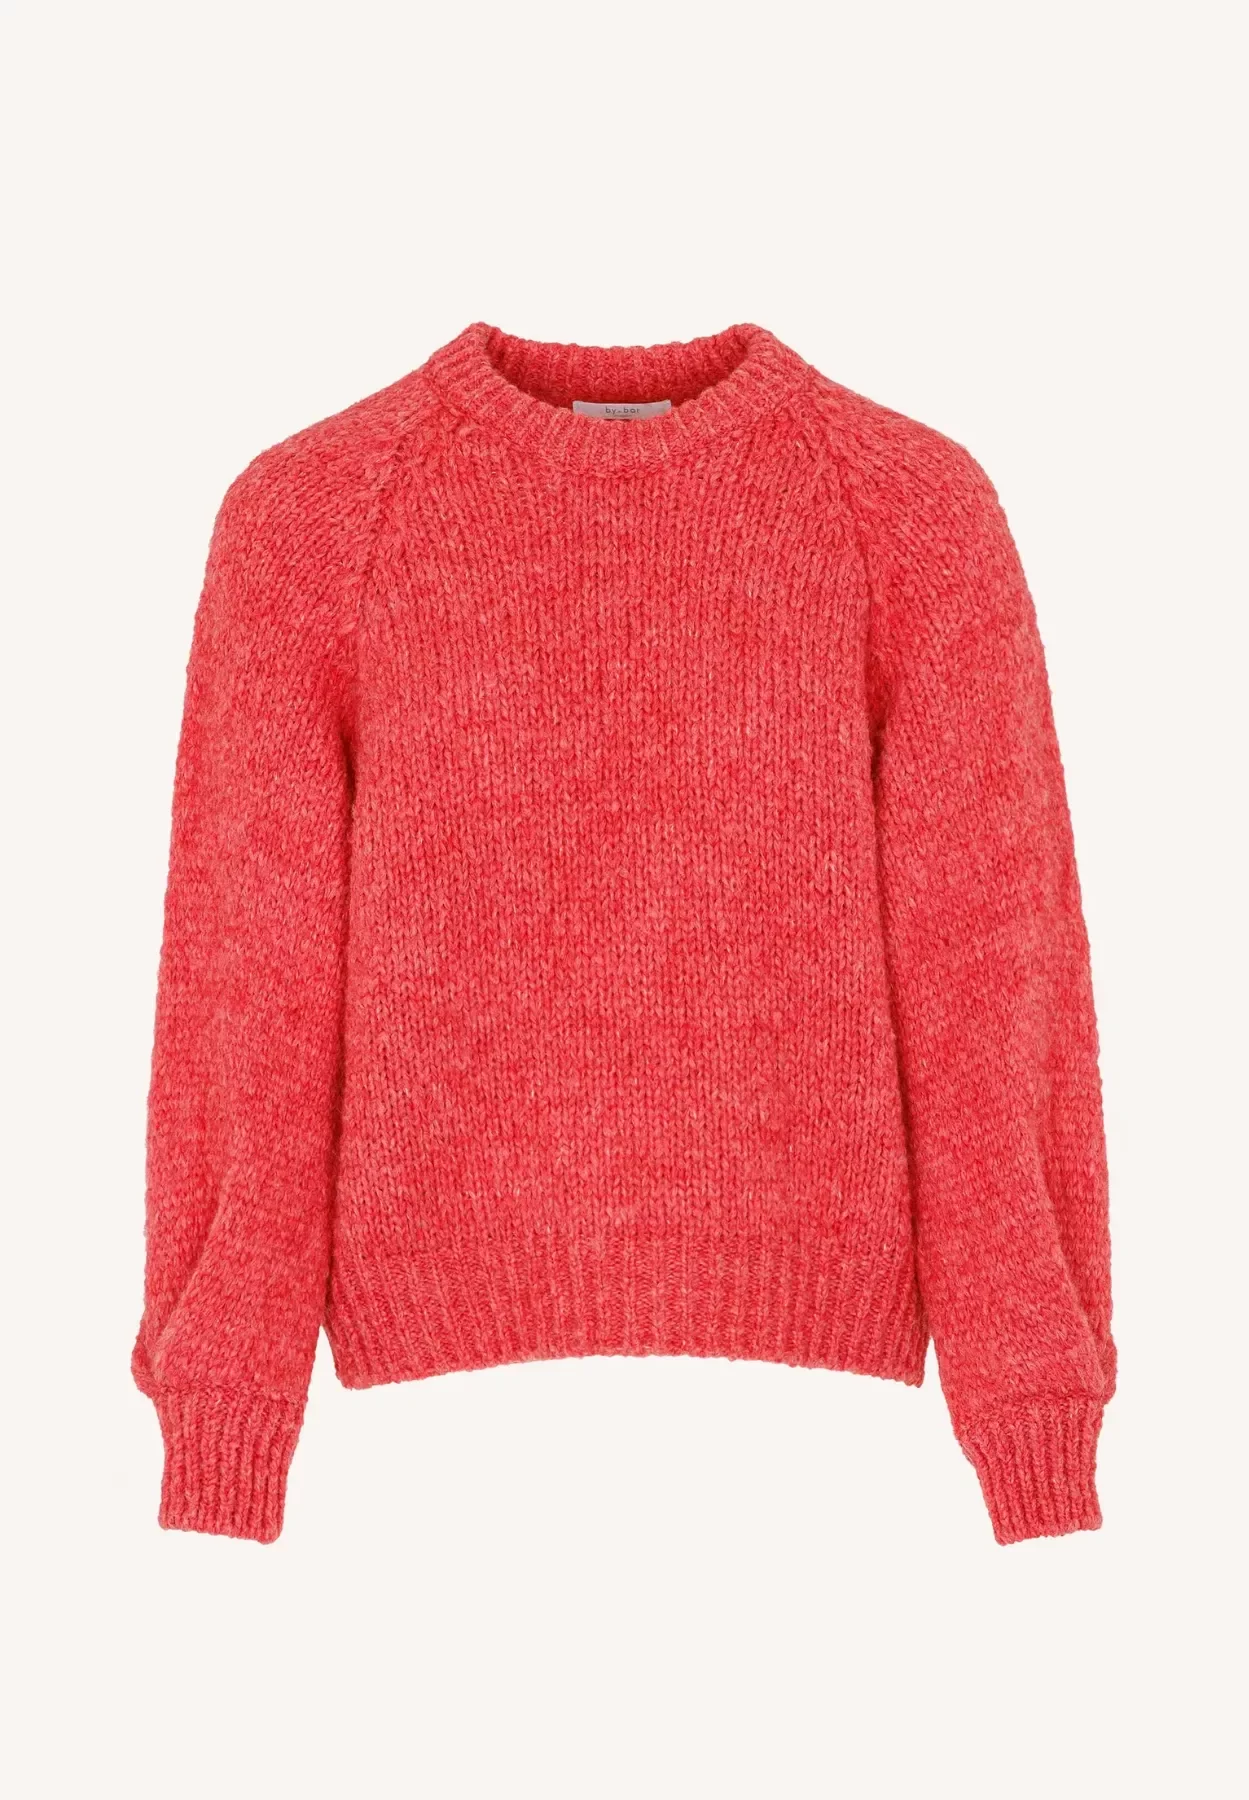 by-bar amsterdam - lucia pullover - flamingo red 5